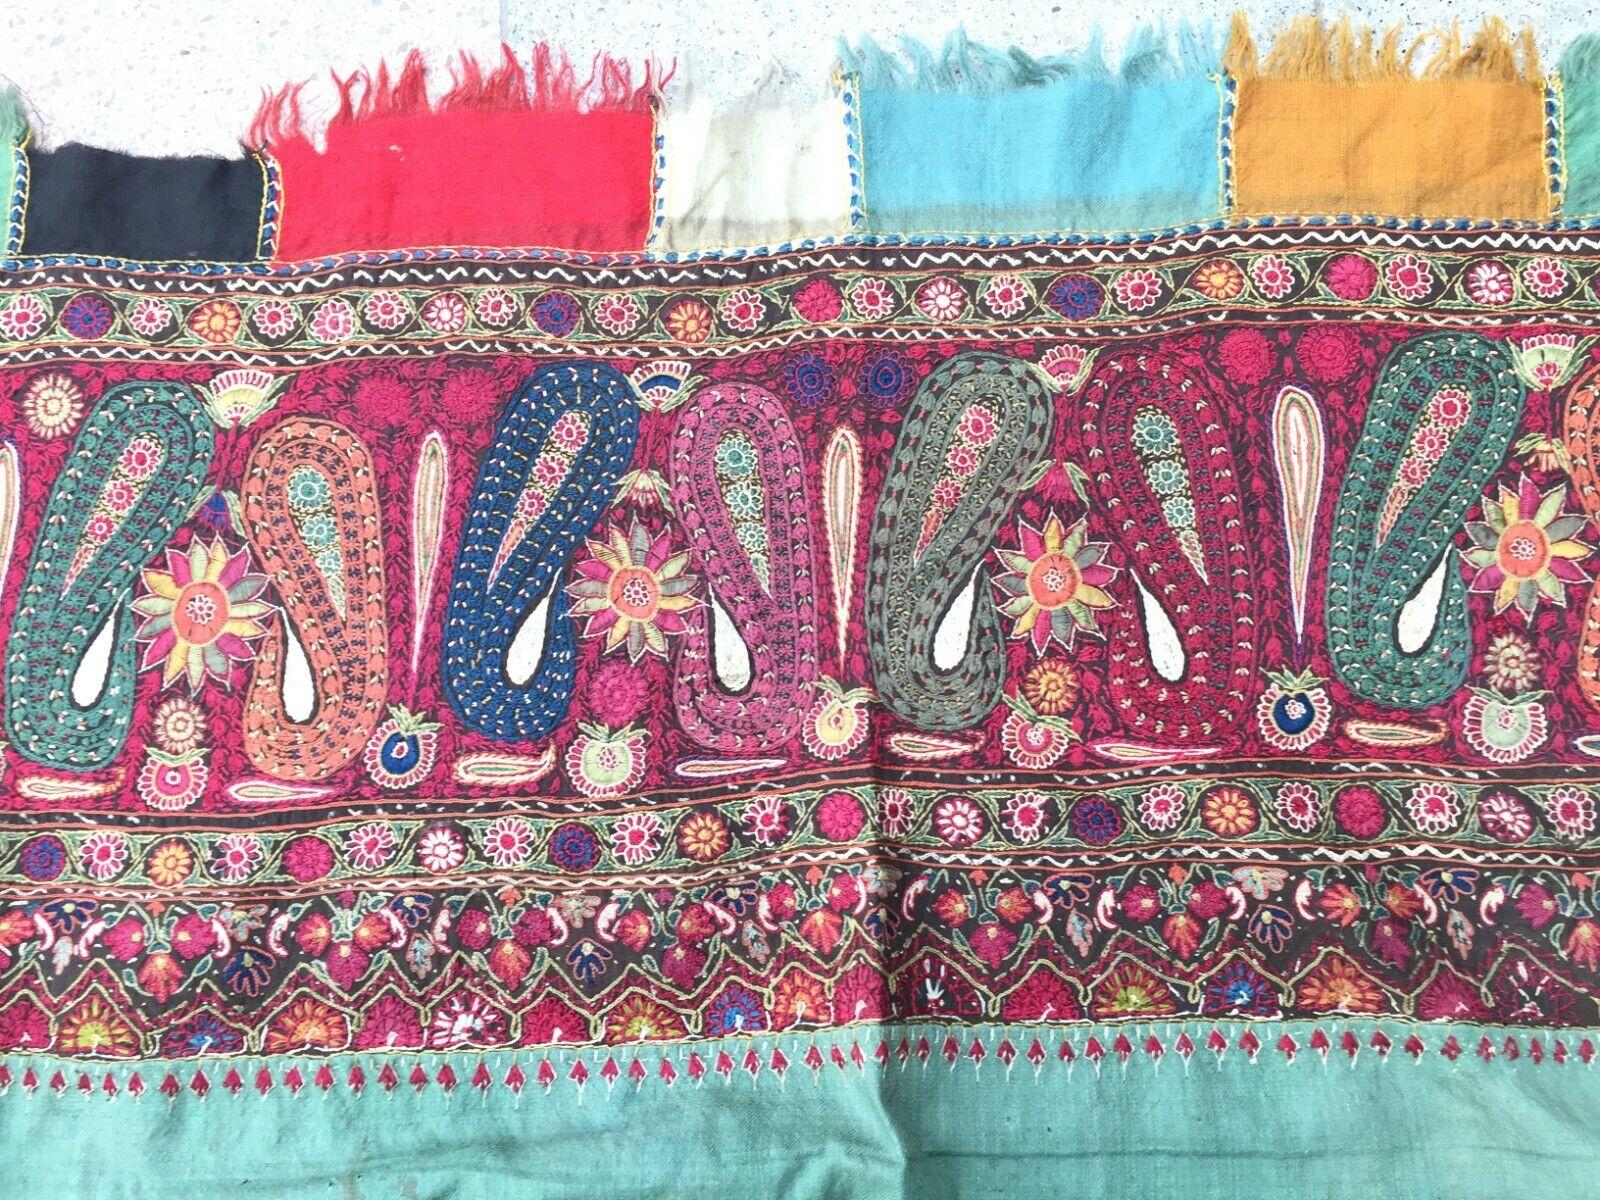 Early 20th Century Handmade Antique Indian Kashmir Shawl 4.6' x 4.7', 1900s - 1W05 For Sale